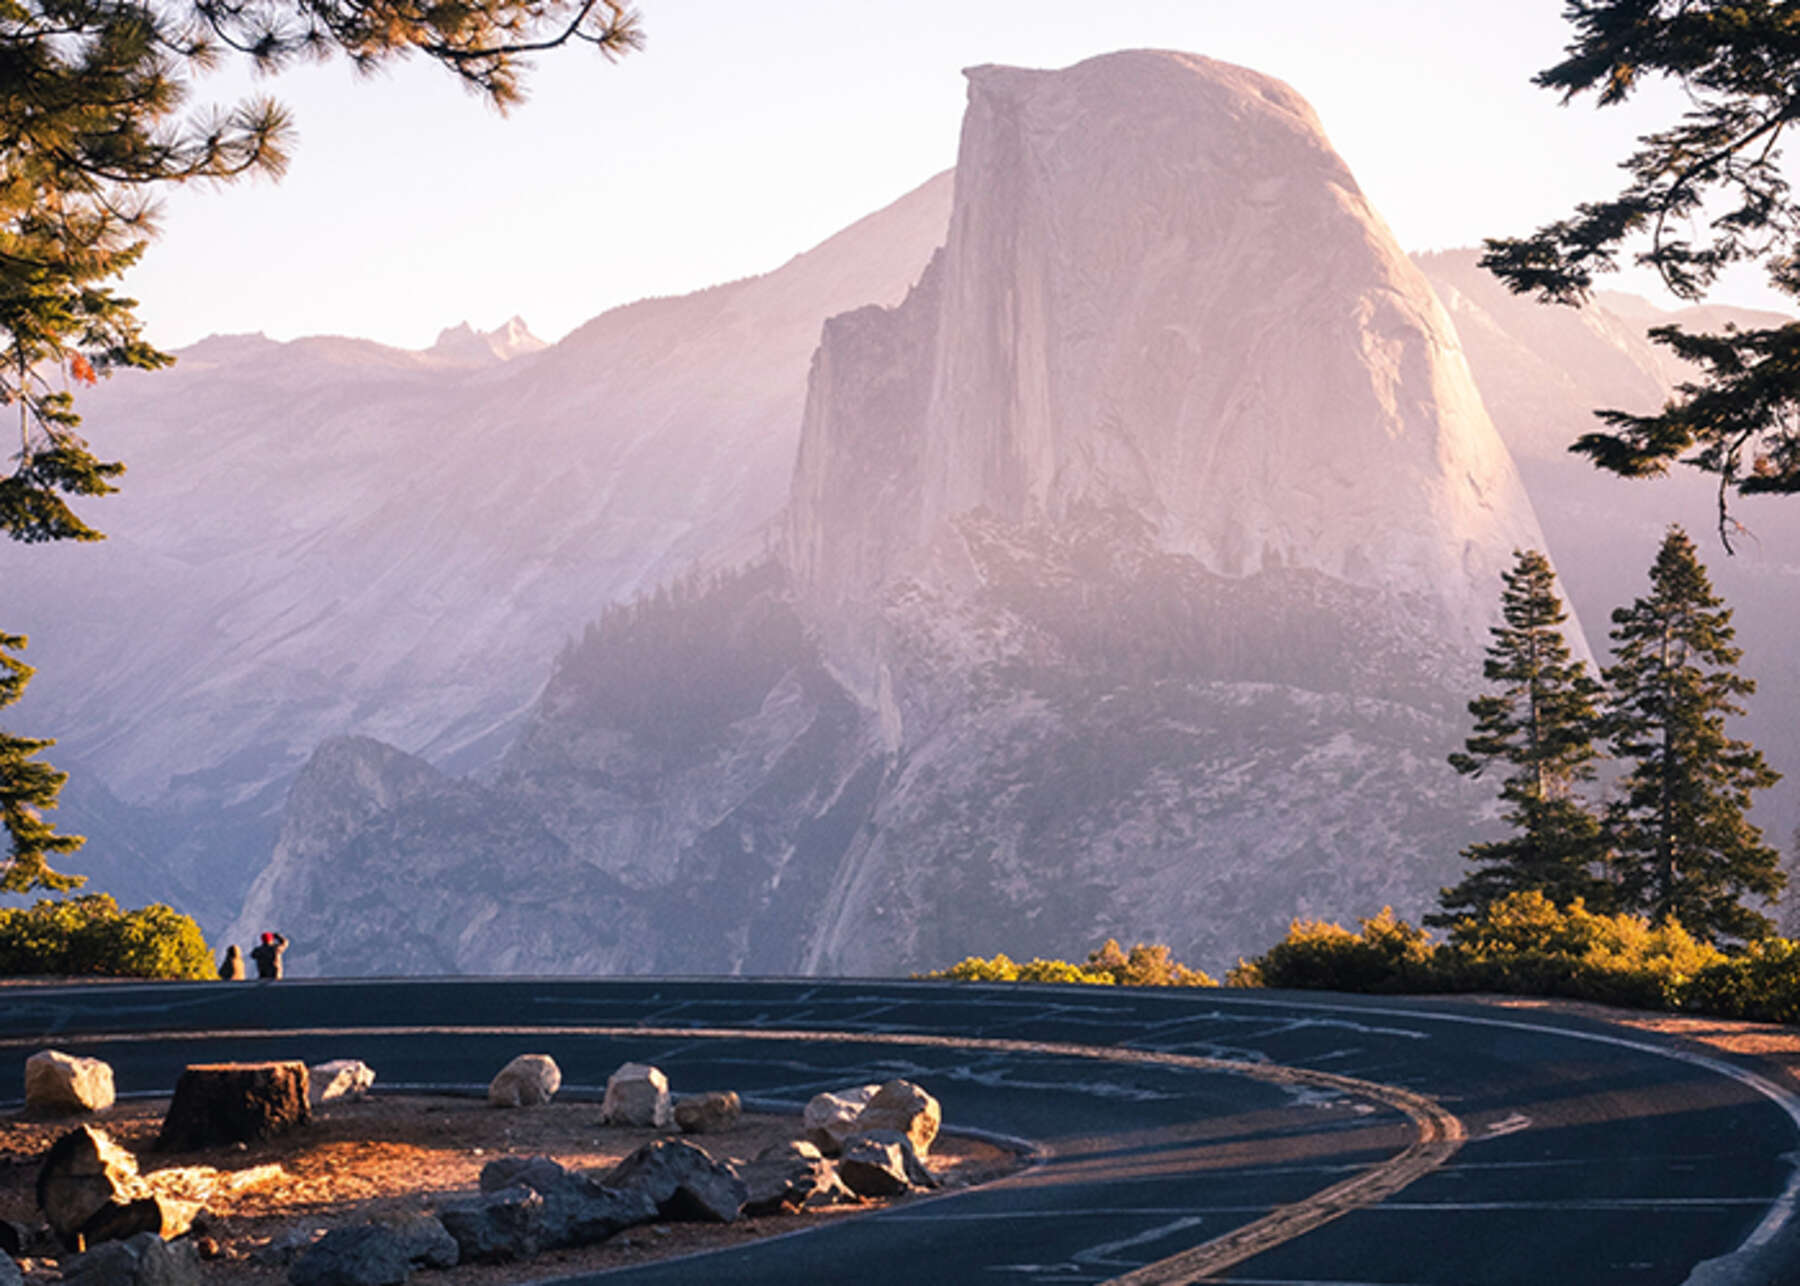 Driving near Yosemite National Park with Half Dome in view. What a great place to camp on federal land.